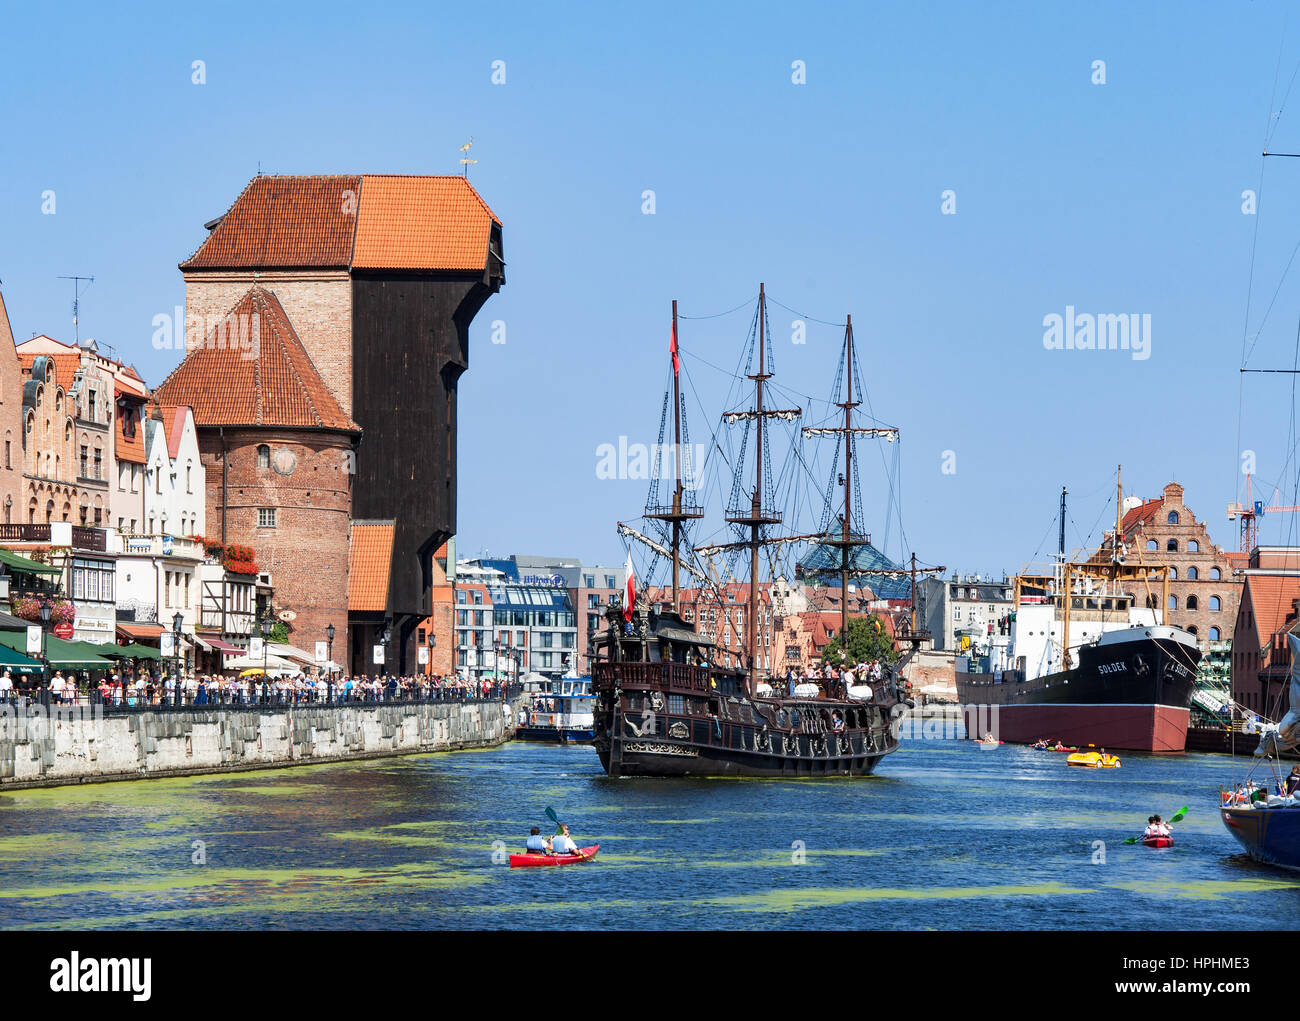 GDANSK, POLAND – AUGUST 27, 2016: Old city with medieval wooden port crane, the oldest in Europe,  Motlava river, tourist pirate ship, boats, kayaks a Stock Photo